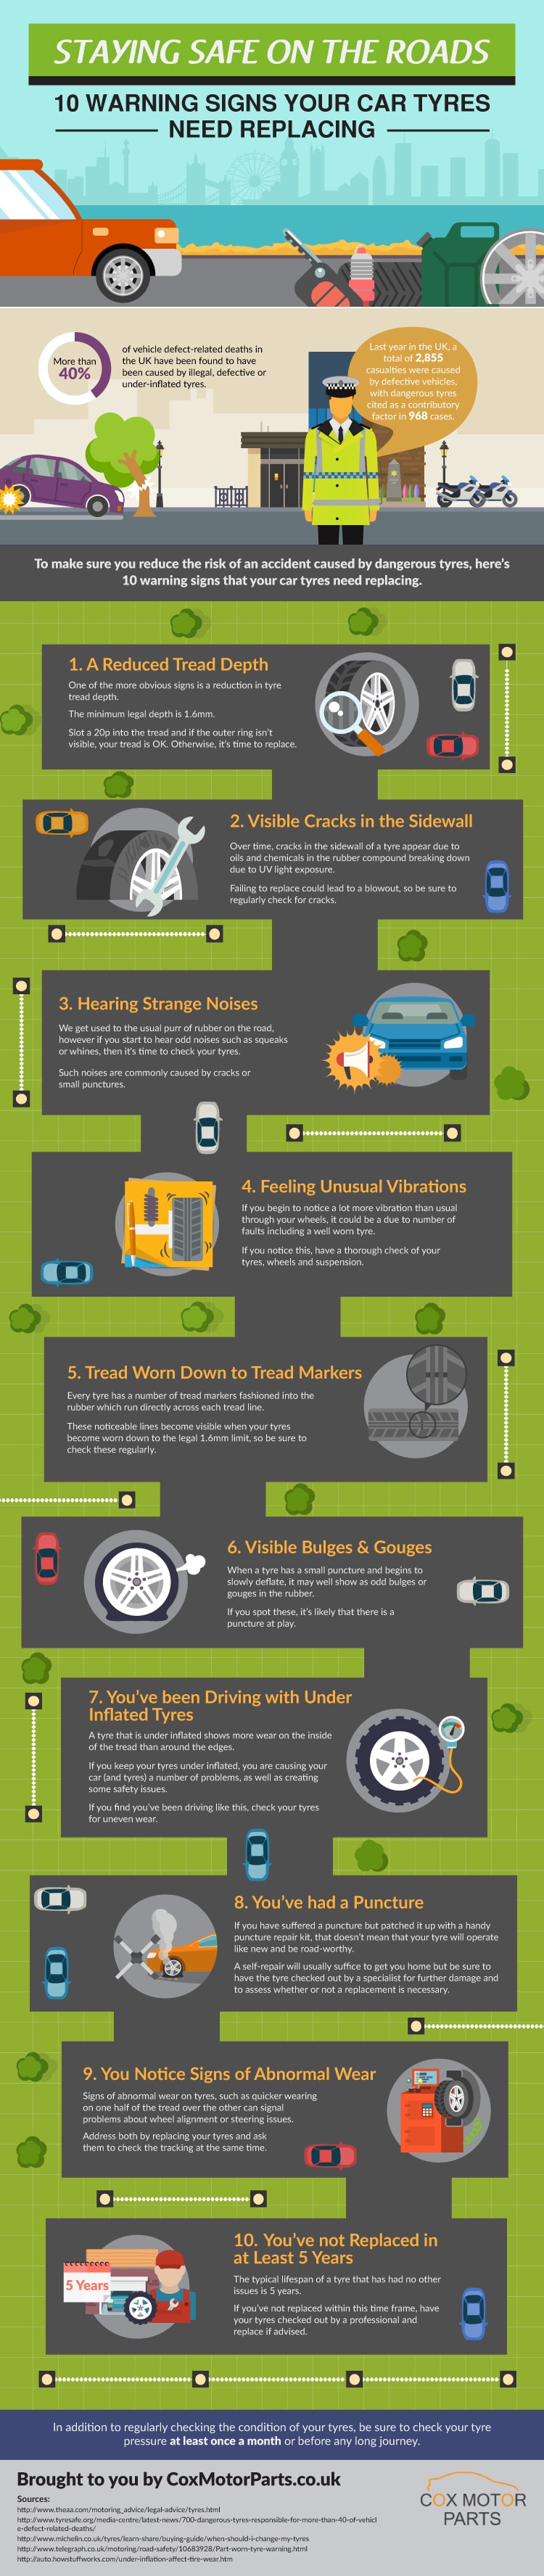 10 Warning Signs Your Car Tyres Need Replacing [Infographic]